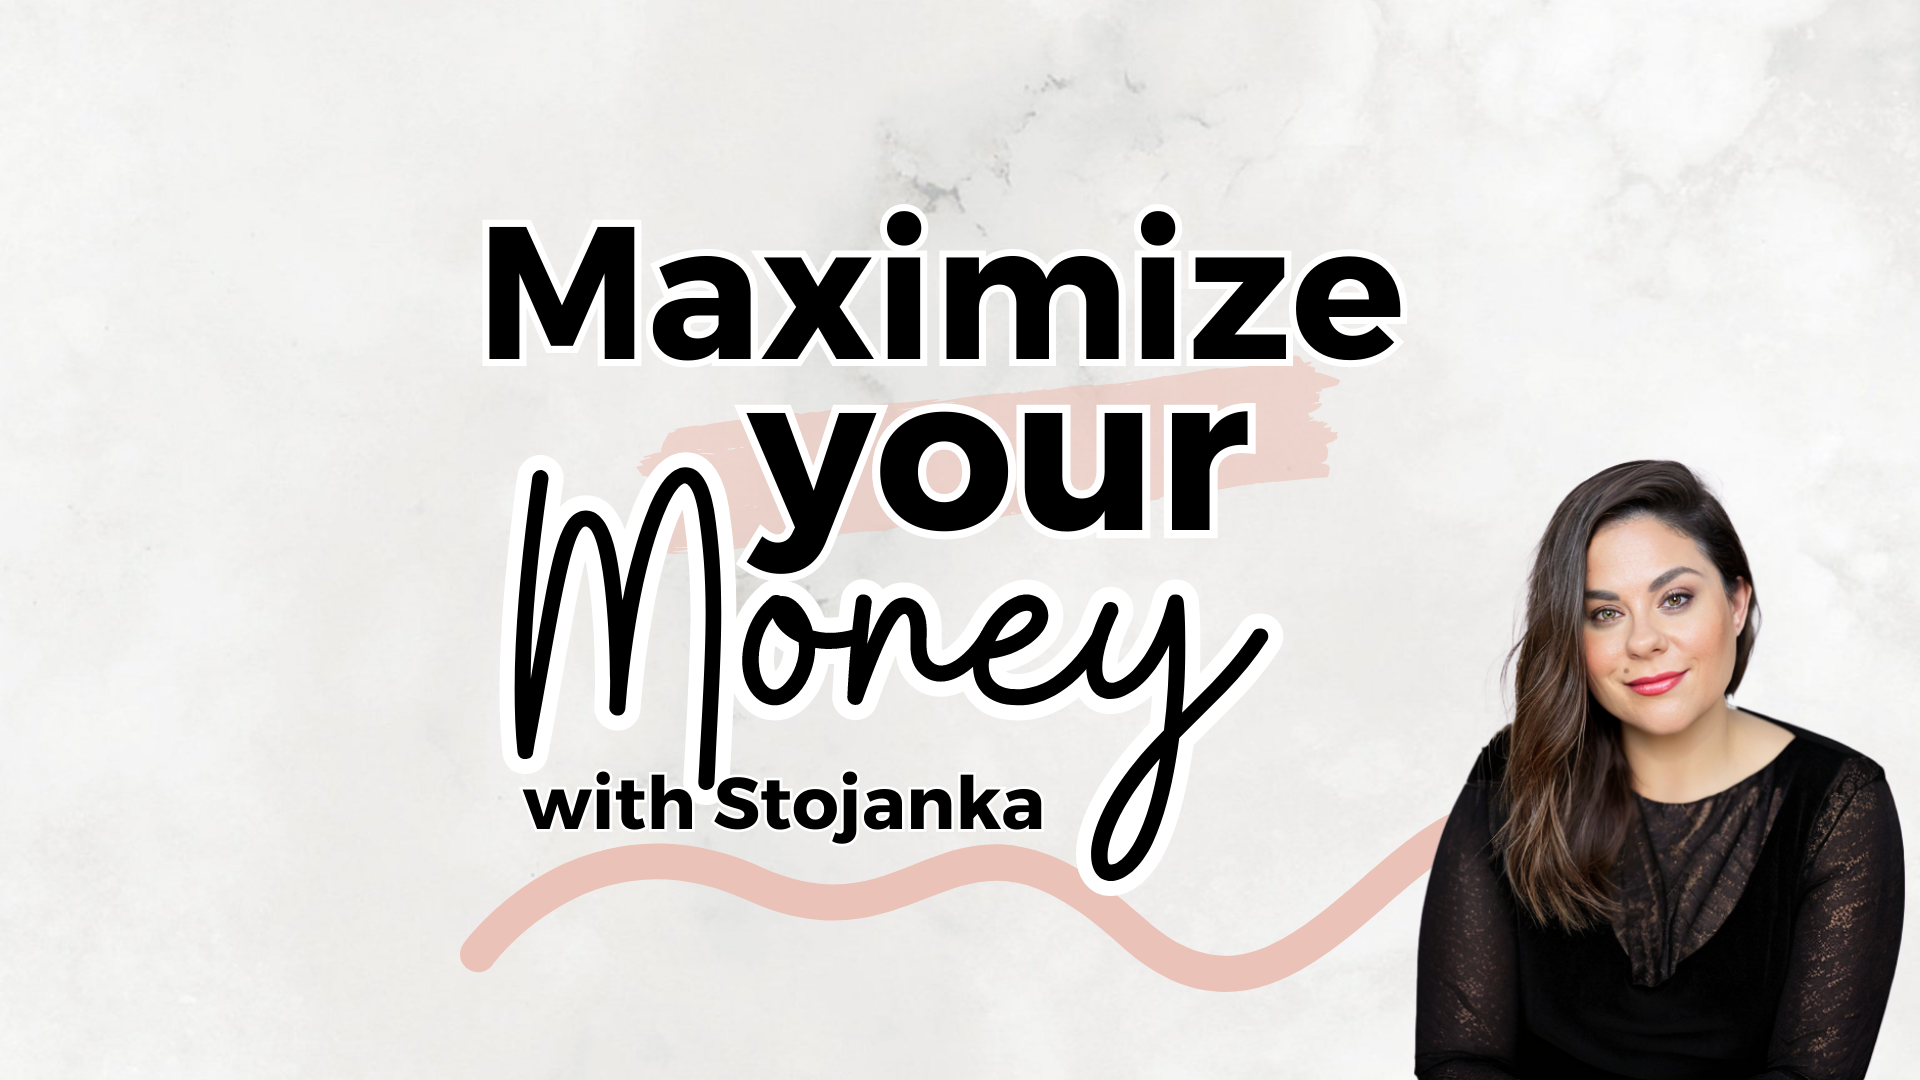 Stojanka Berry is a white female with brown medium-length hair. She is wearing a black shirt and smiling directly at the camera. Text around her reads: Maximize your money with Stojanka.